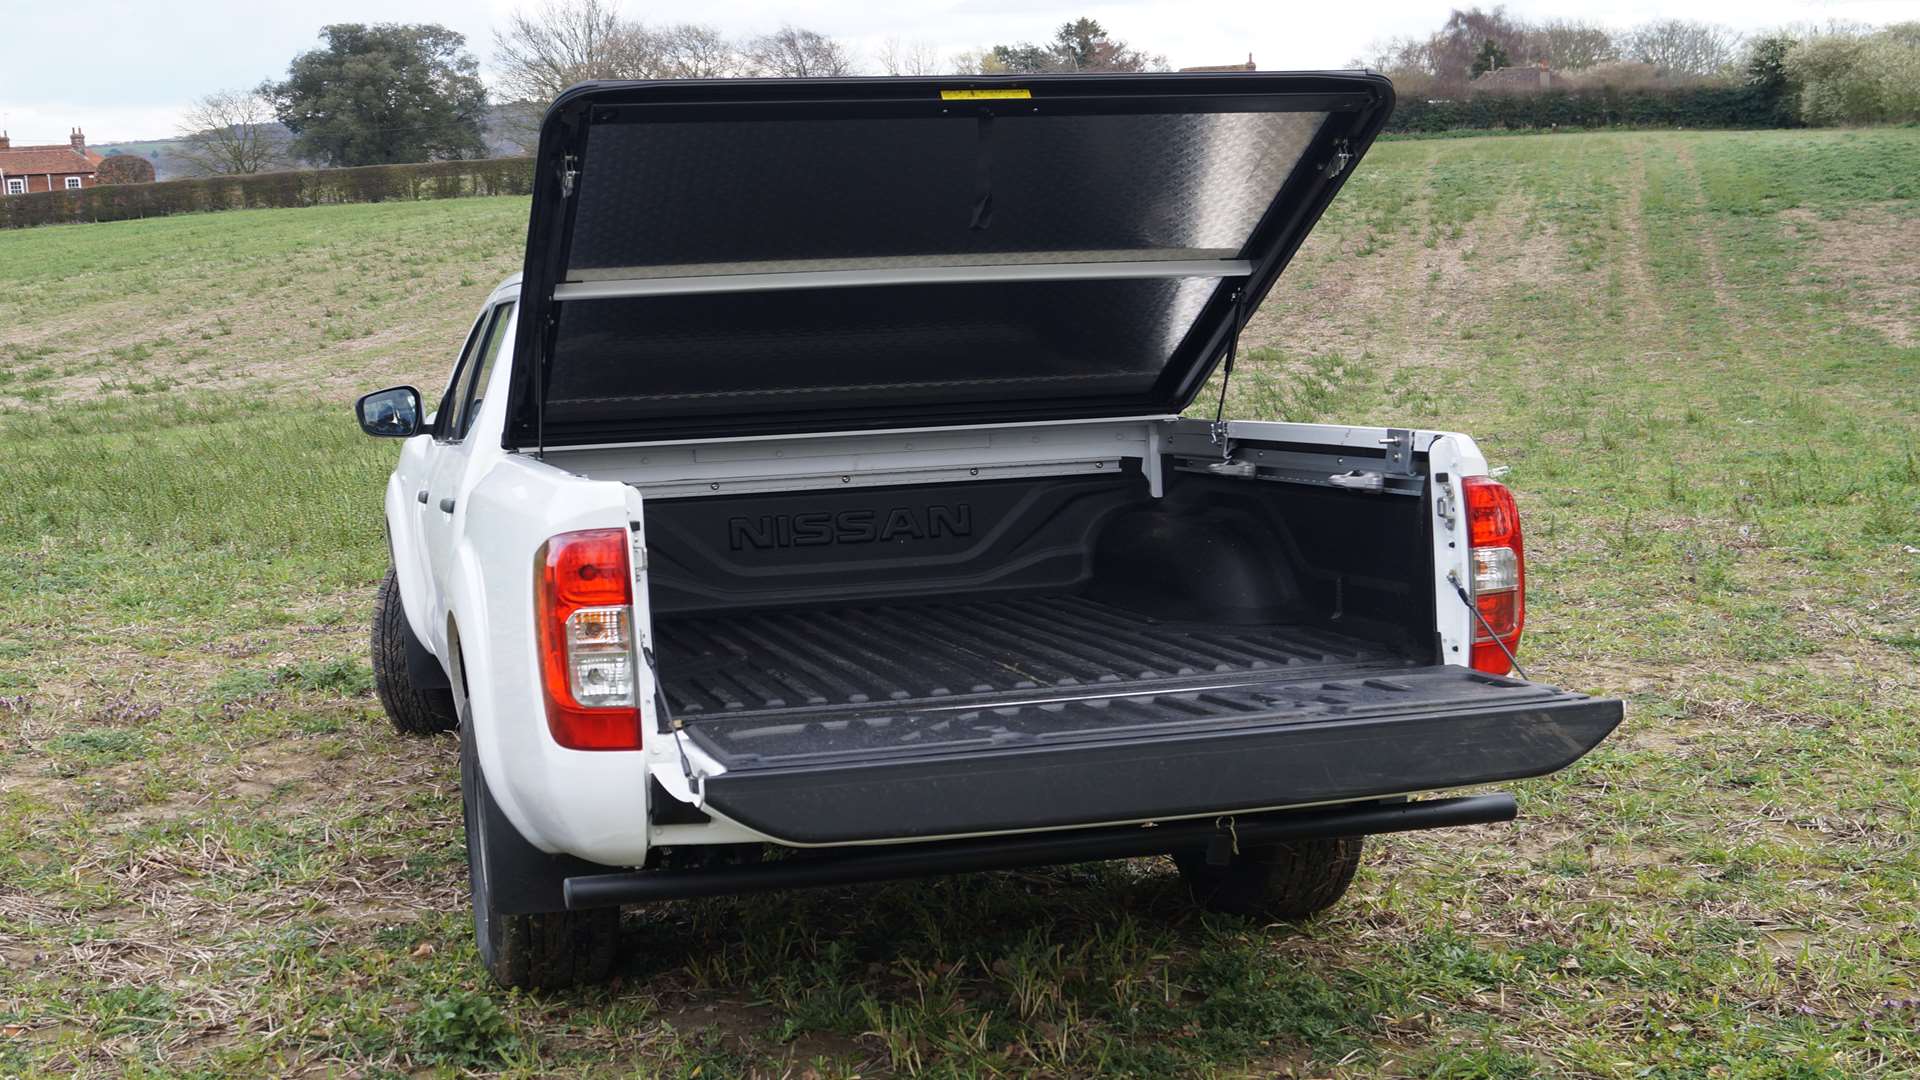 A flat load bed with a wide opening. Perfect for dragging an unwanted sofa to the tip